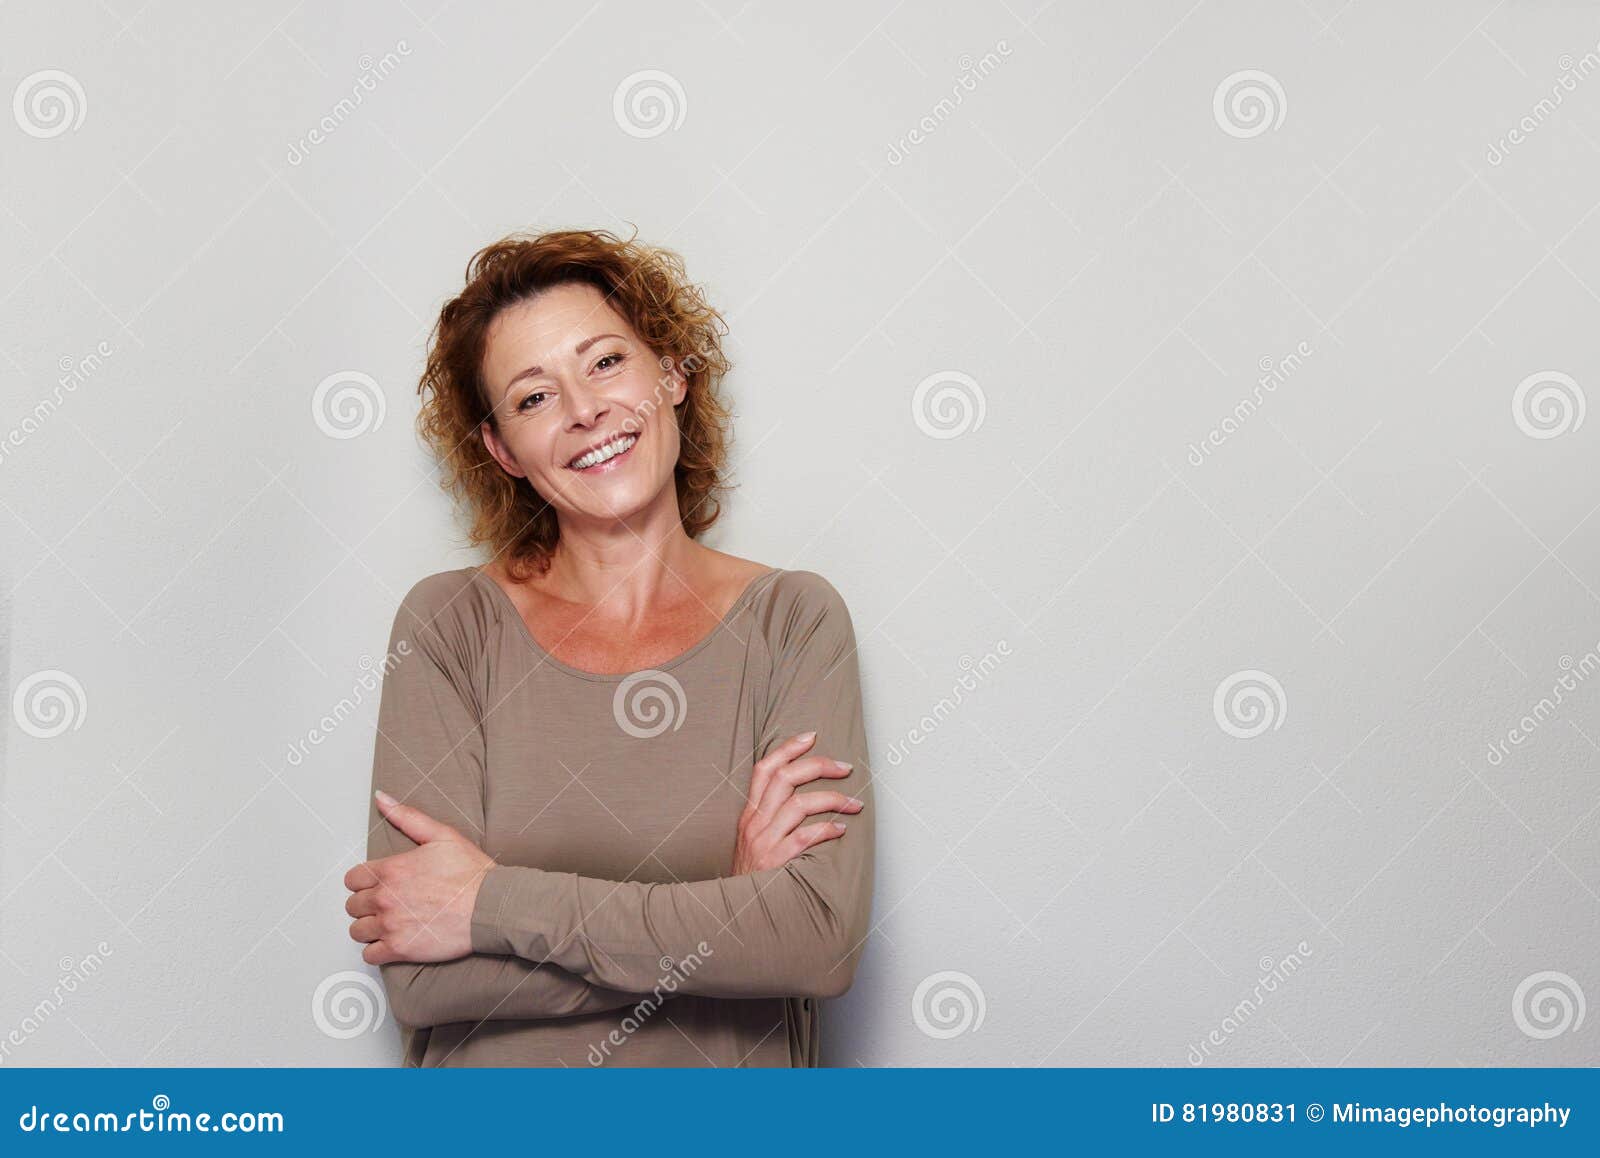 smiling woman standing with arms crossed